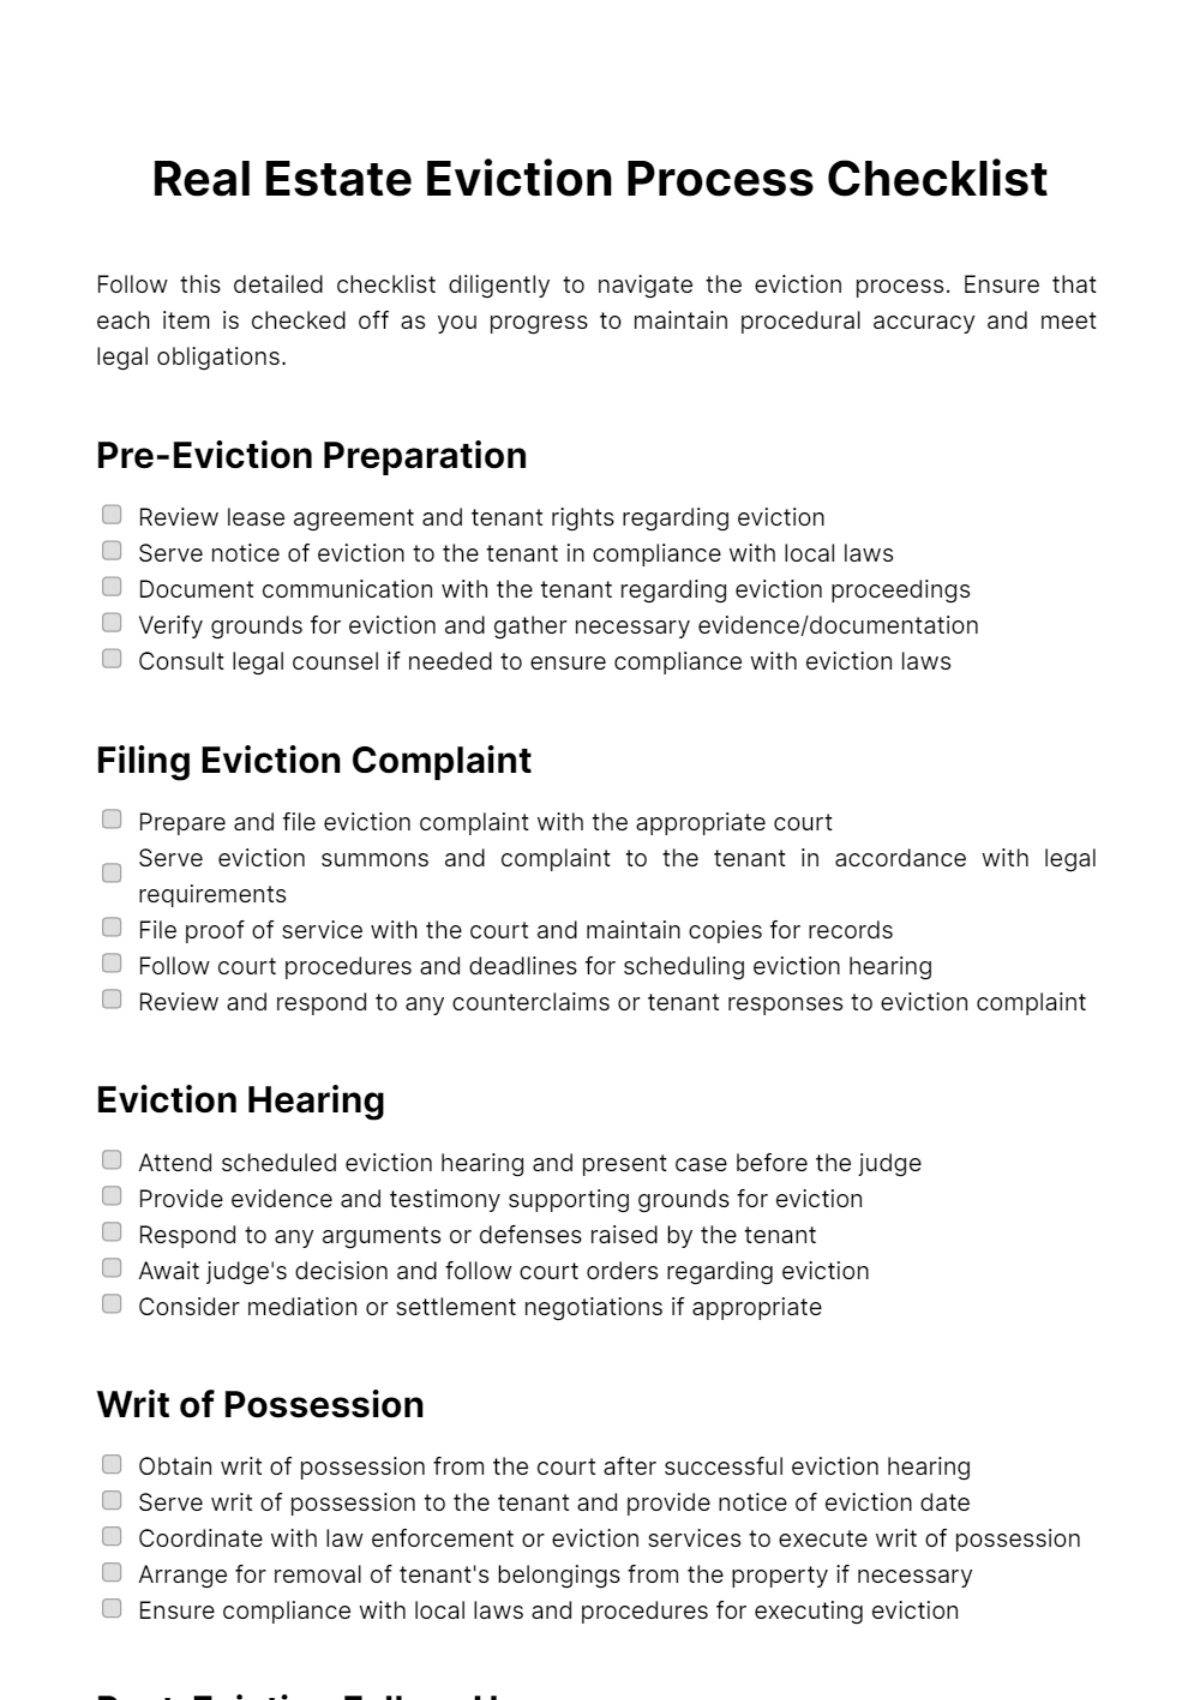 Free Real Estate Eviction Process Checklist Template